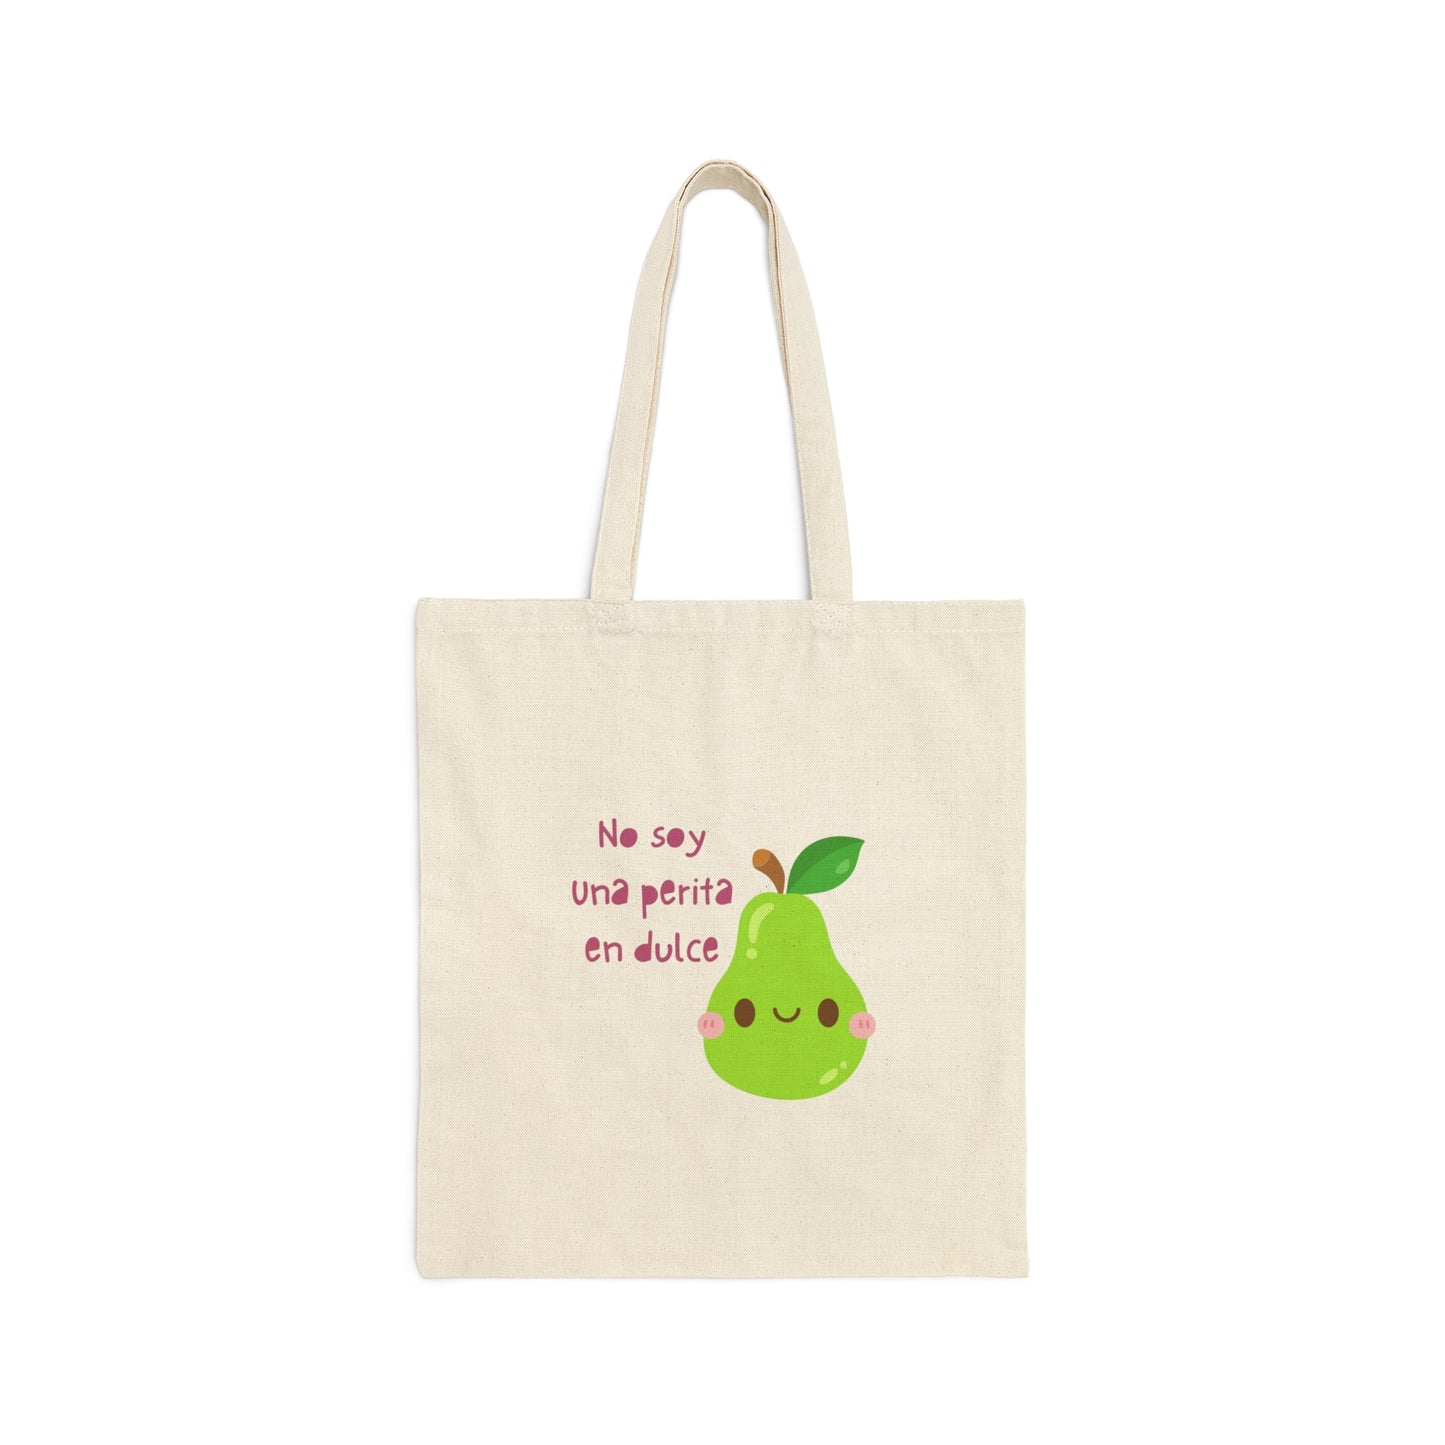 Cotton Canvas perita en dulce, kawaii mexican phrase Tote Bag, cute words bag, funny phrase, cool bags, gifts for friends, girlfriend